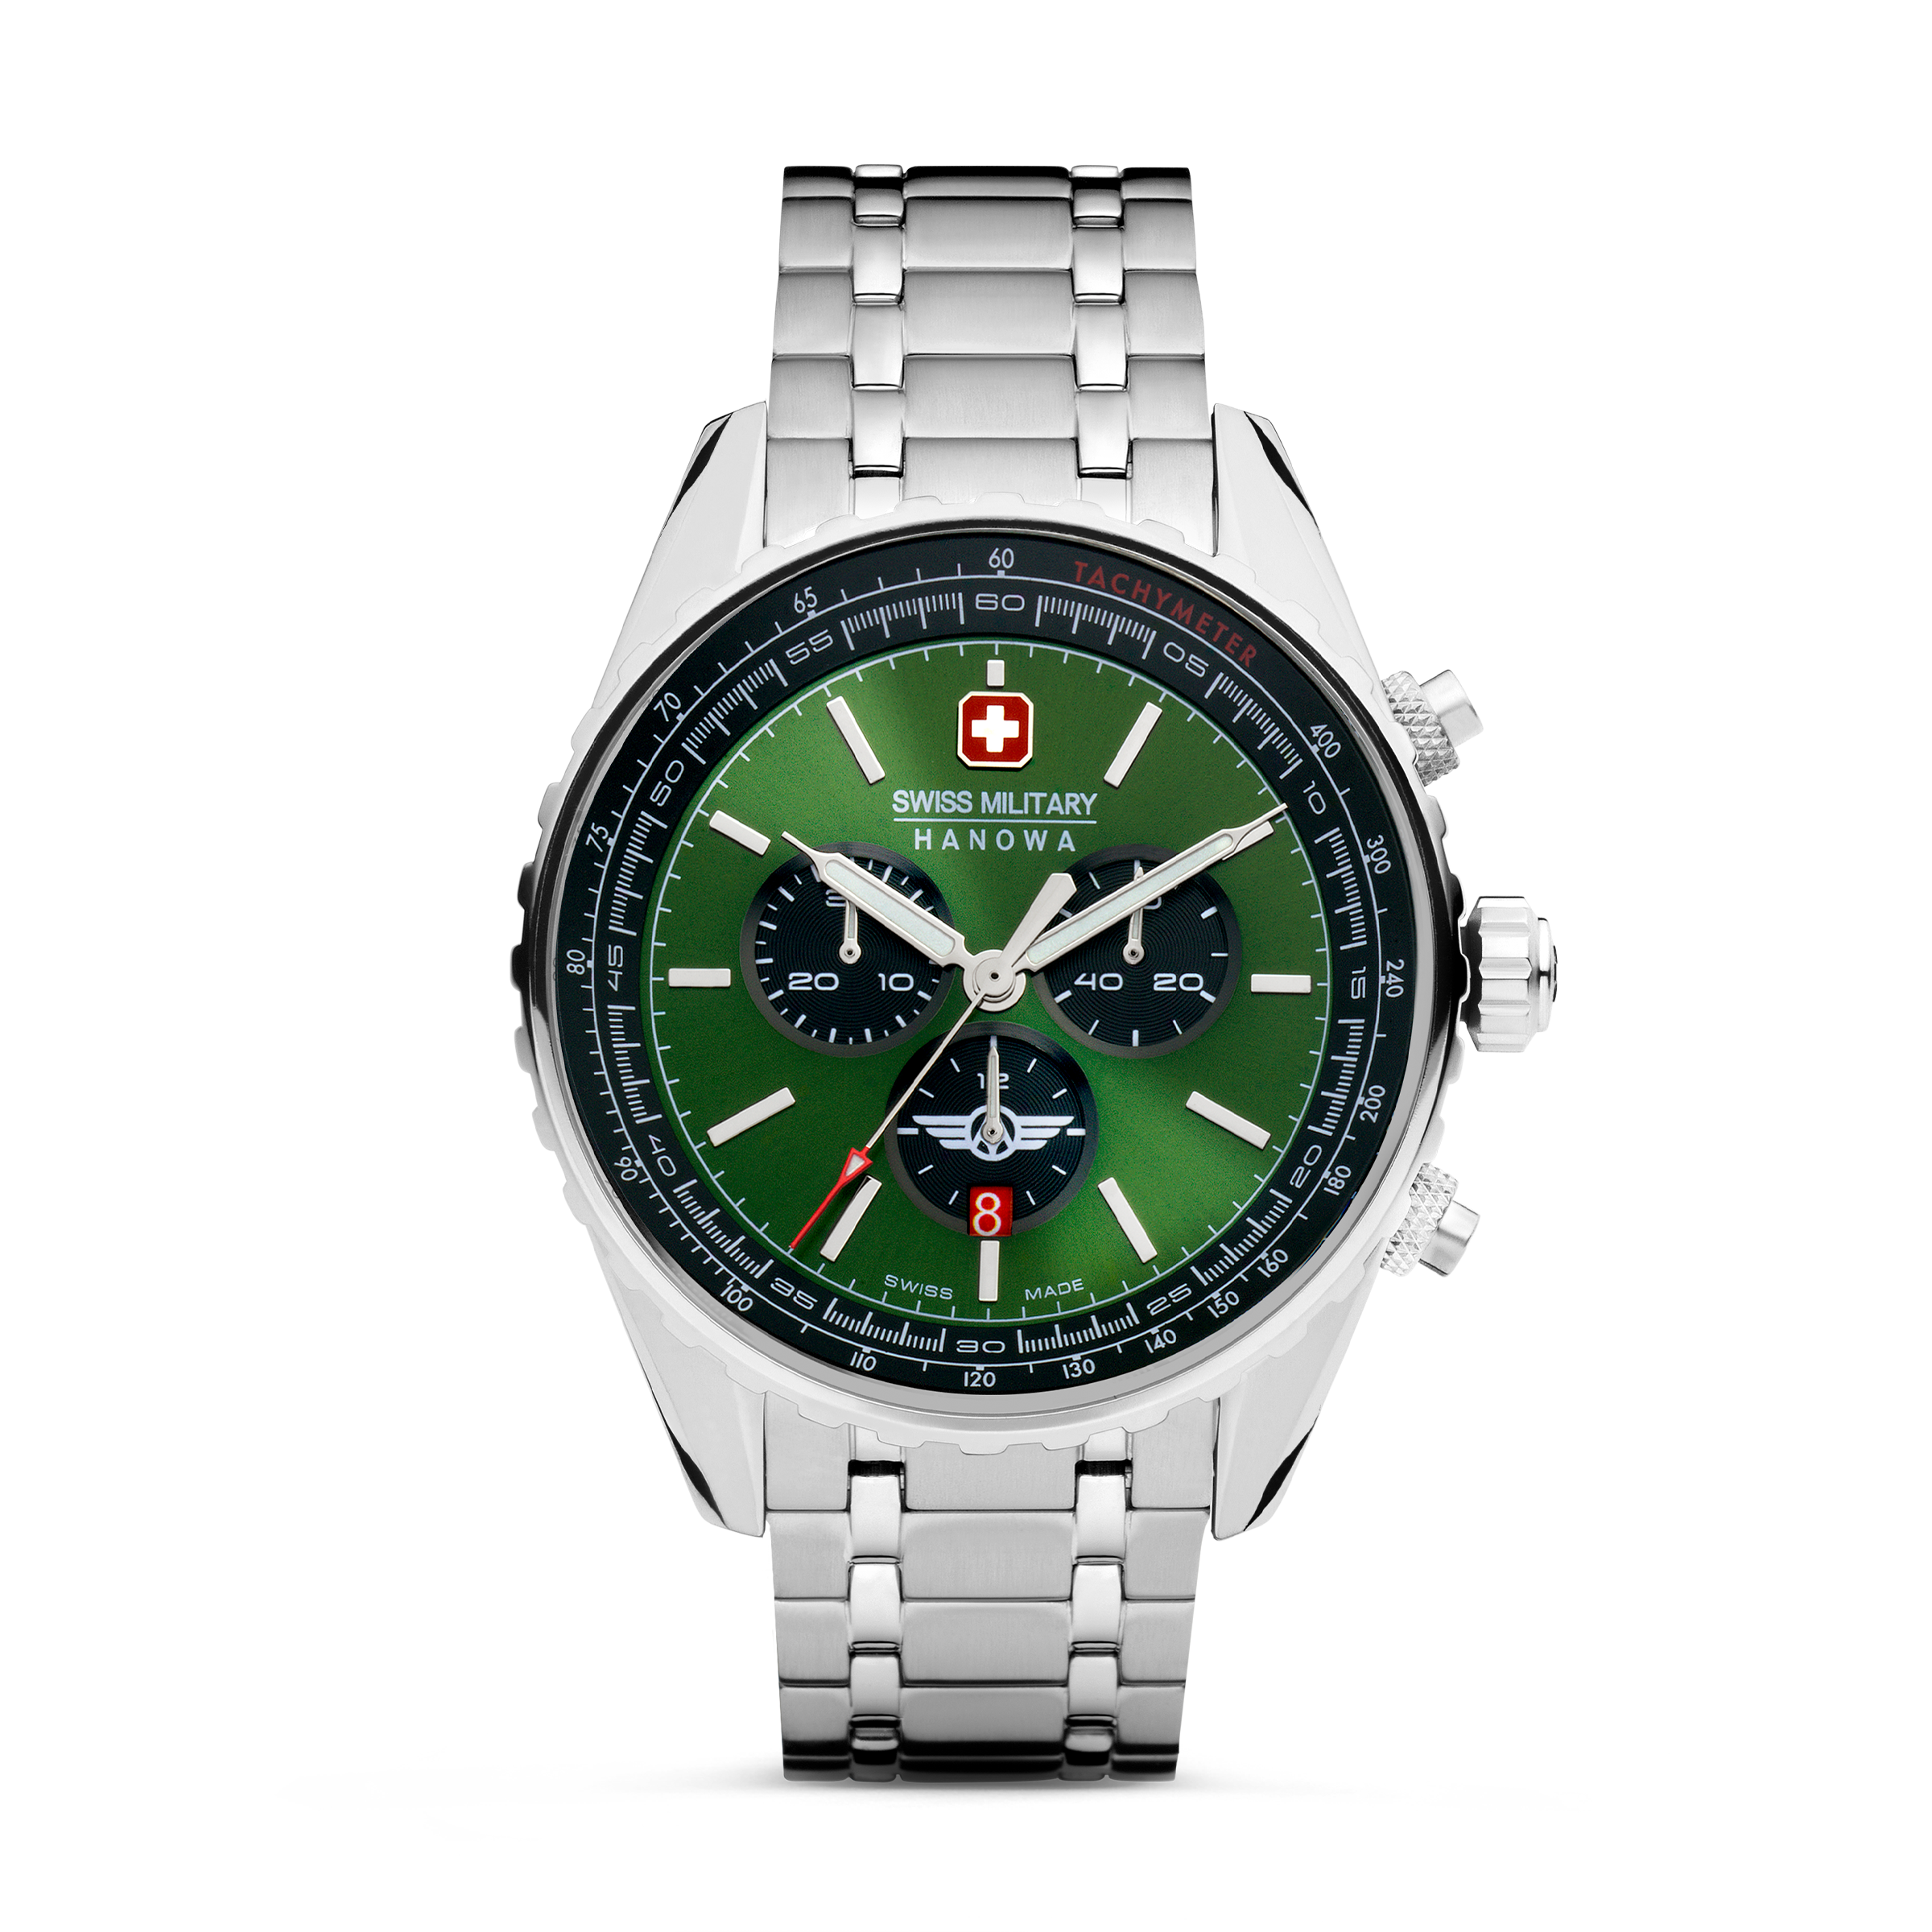 Swiss Military Hanowa Afterburn Chrono. Stainless steel case. Green dial, Stainless steel bracelet.